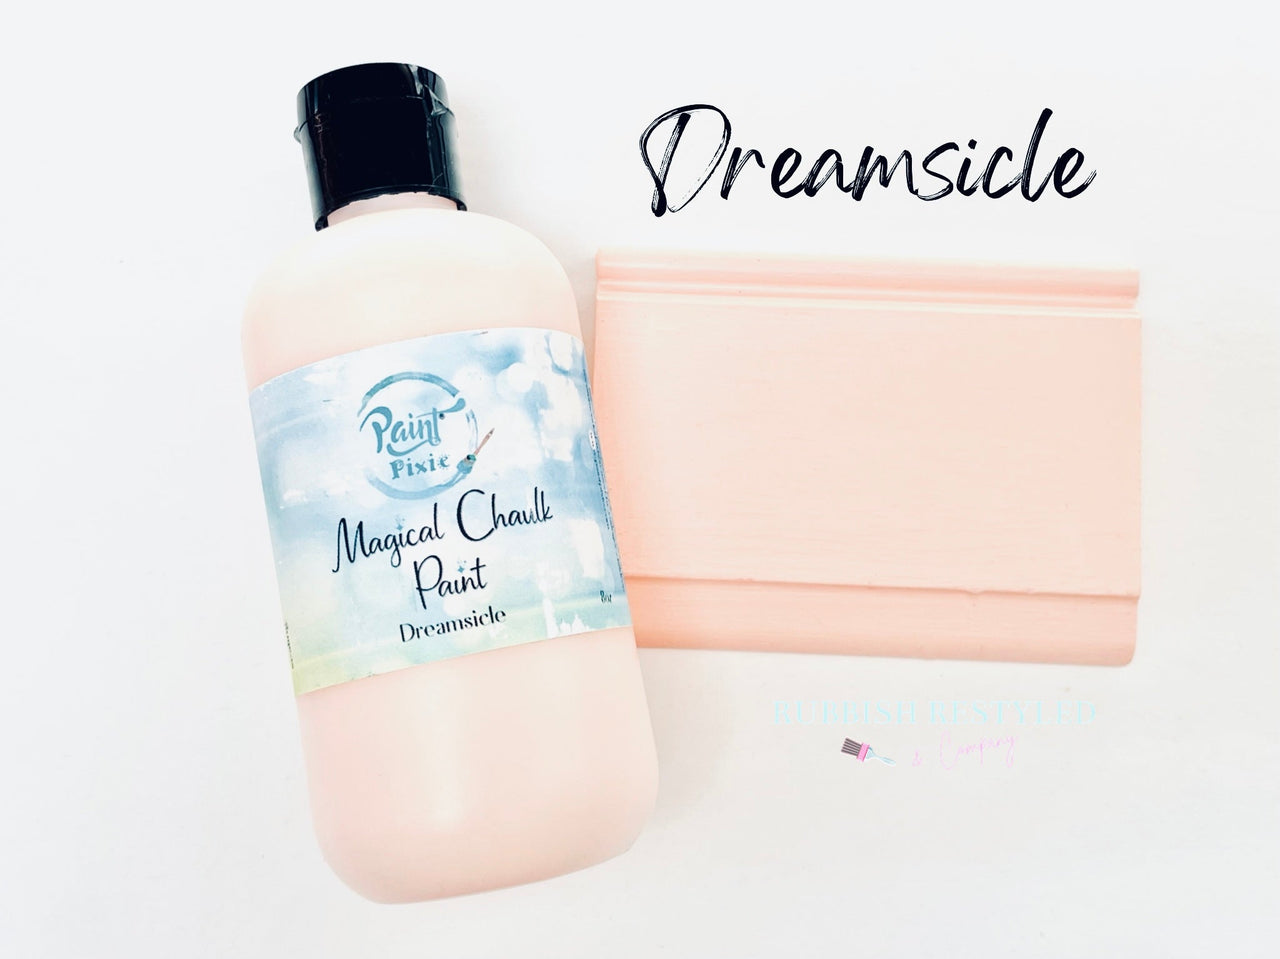 Dreamsicle - Paint Pixie Magical Chaulk Paint - Rubbish Restyled